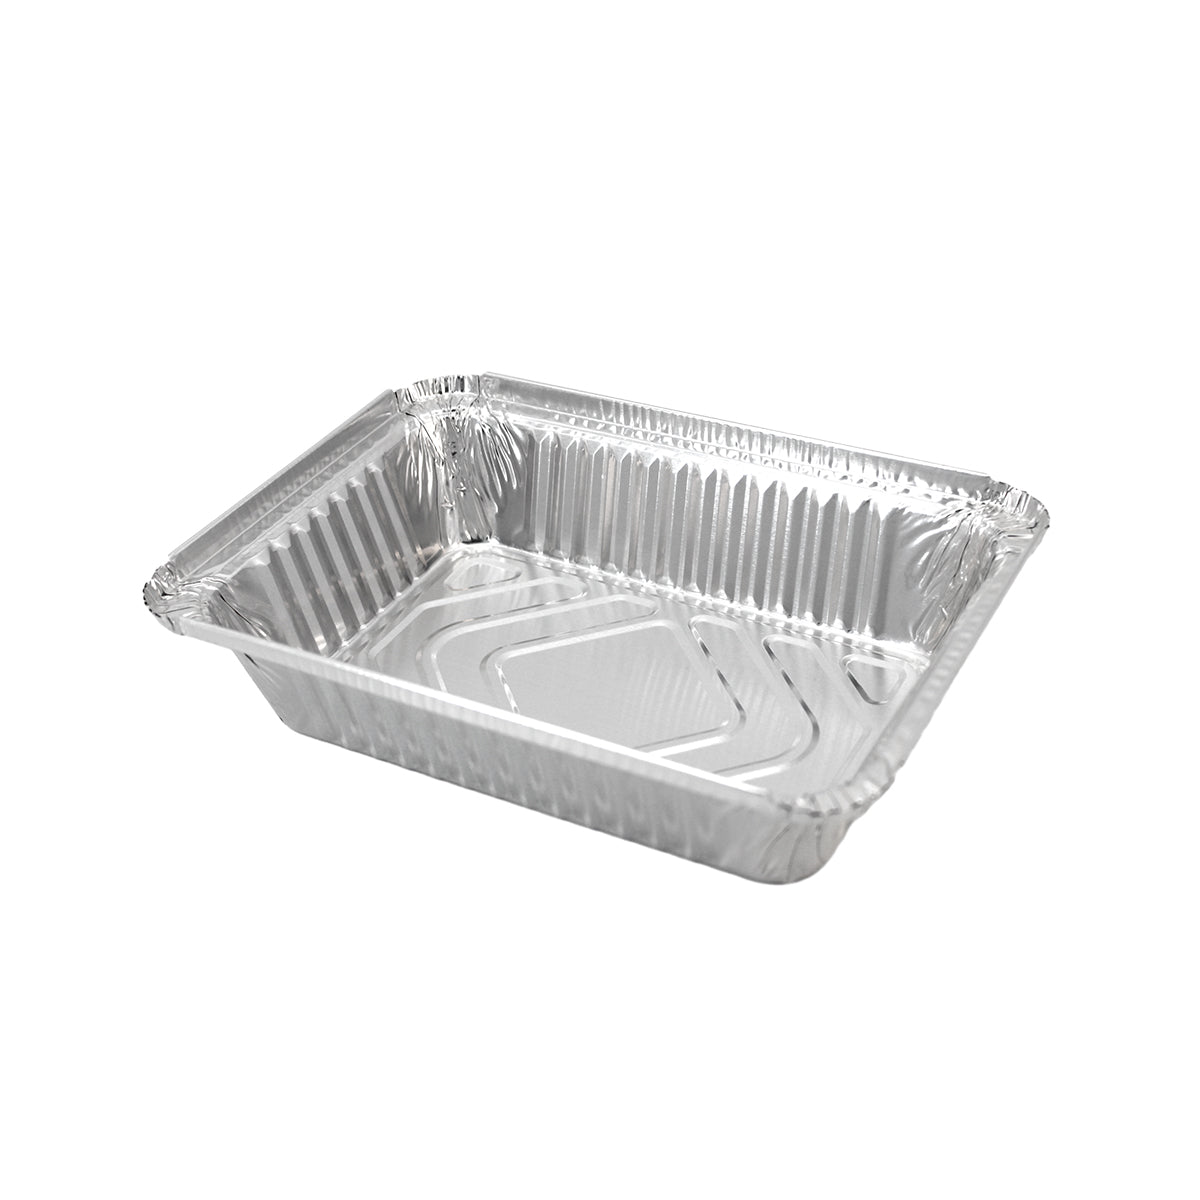 2.25 LB Oblong Takeout Pan | Recyclable Aluminum (Case of 500)